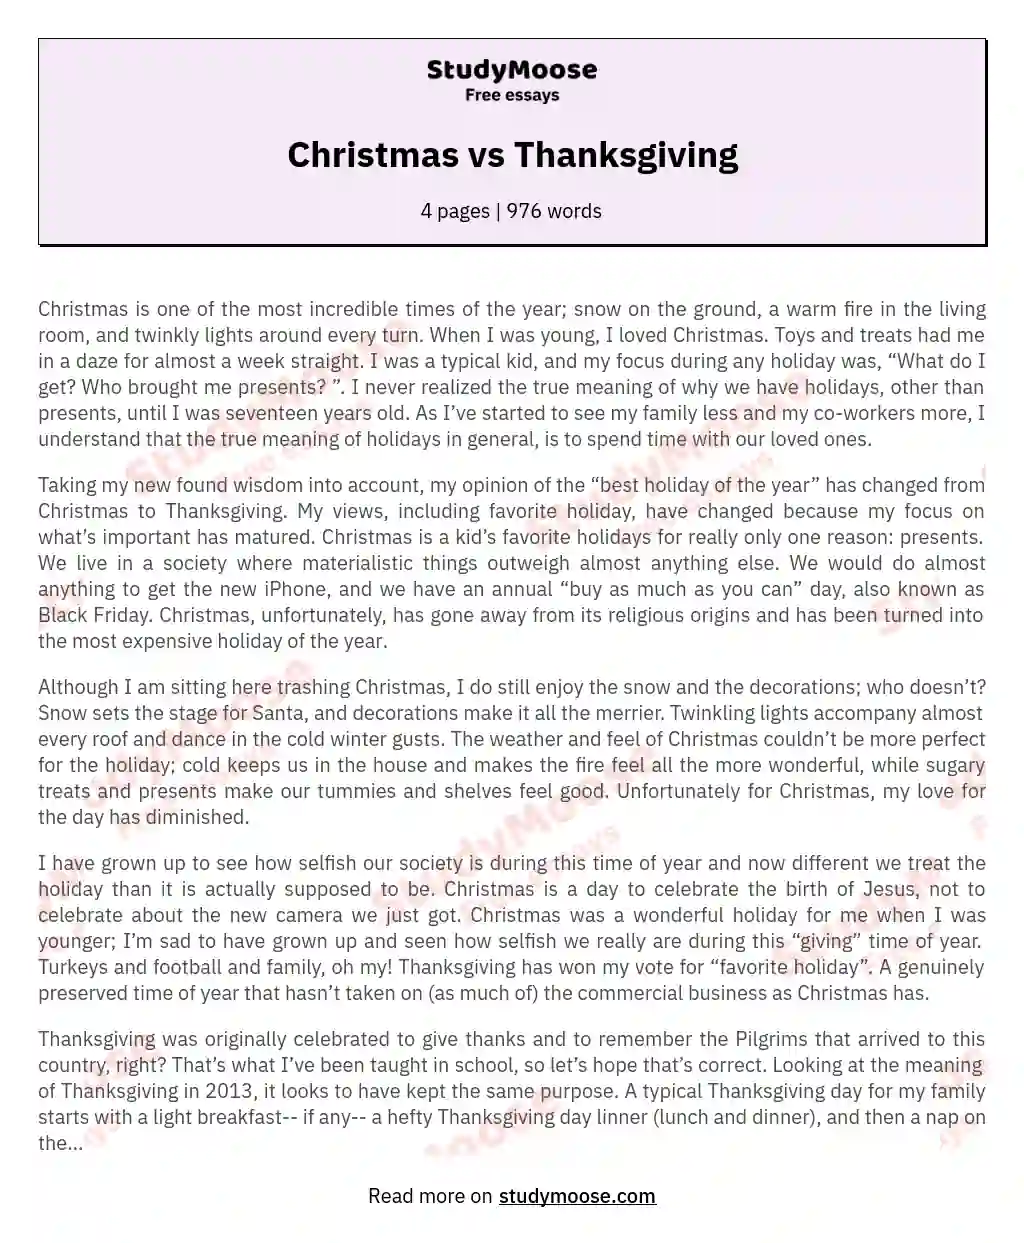 the first thanksgiving essay